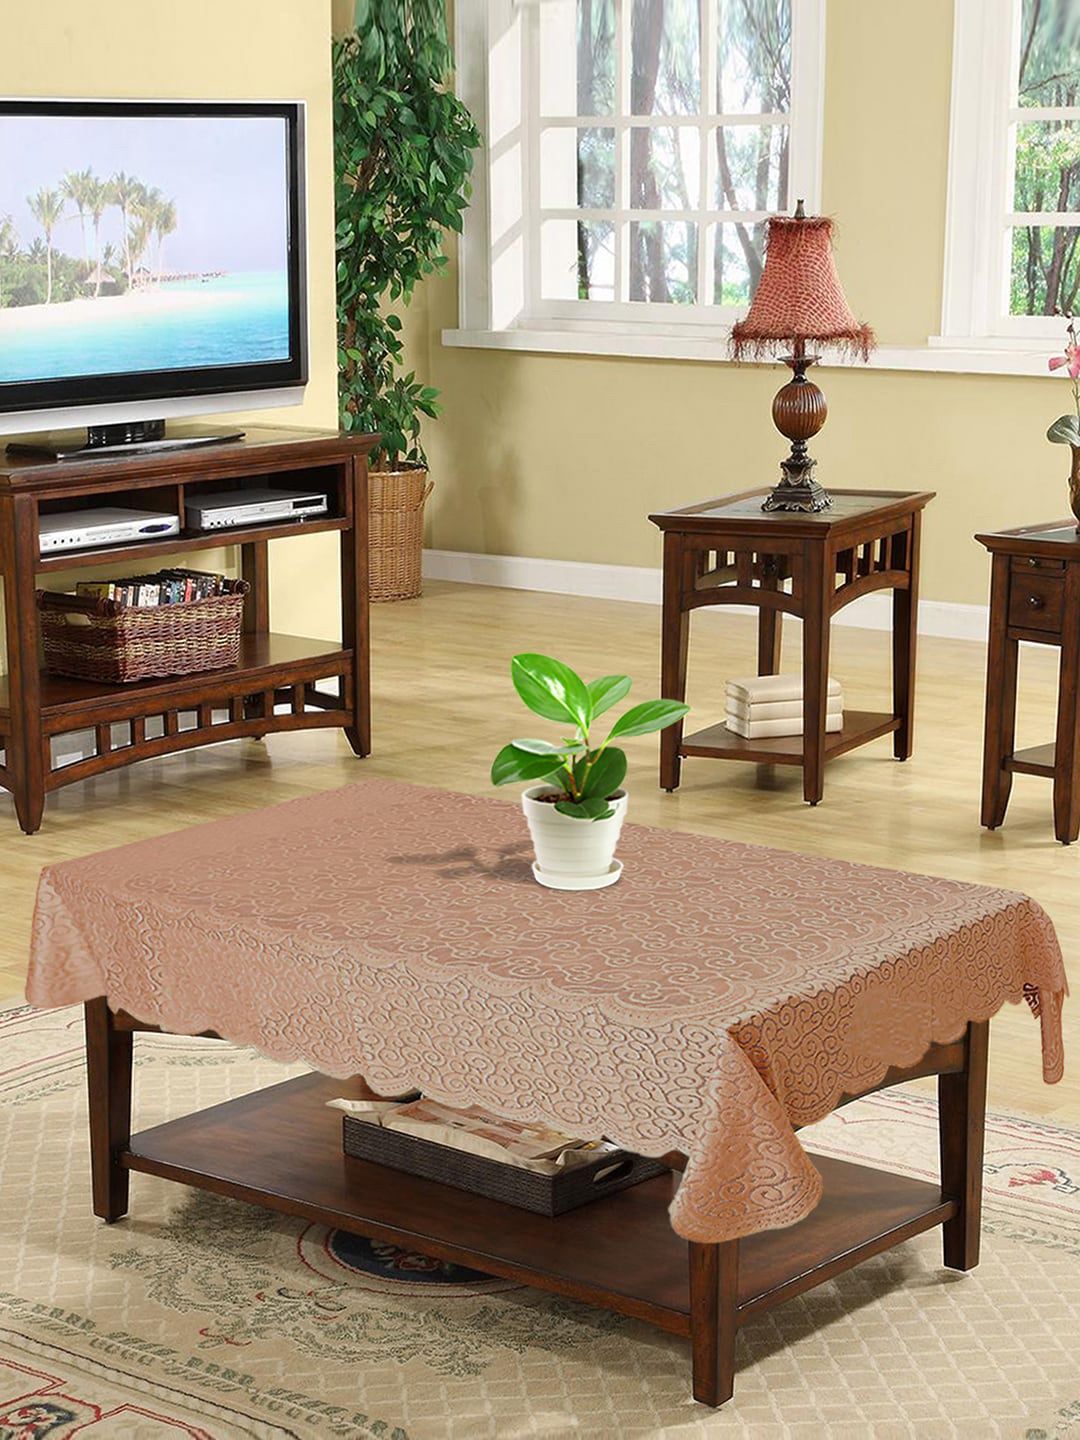 Kuber Industries Brown Geometric Rectangular Table Cover Price in India